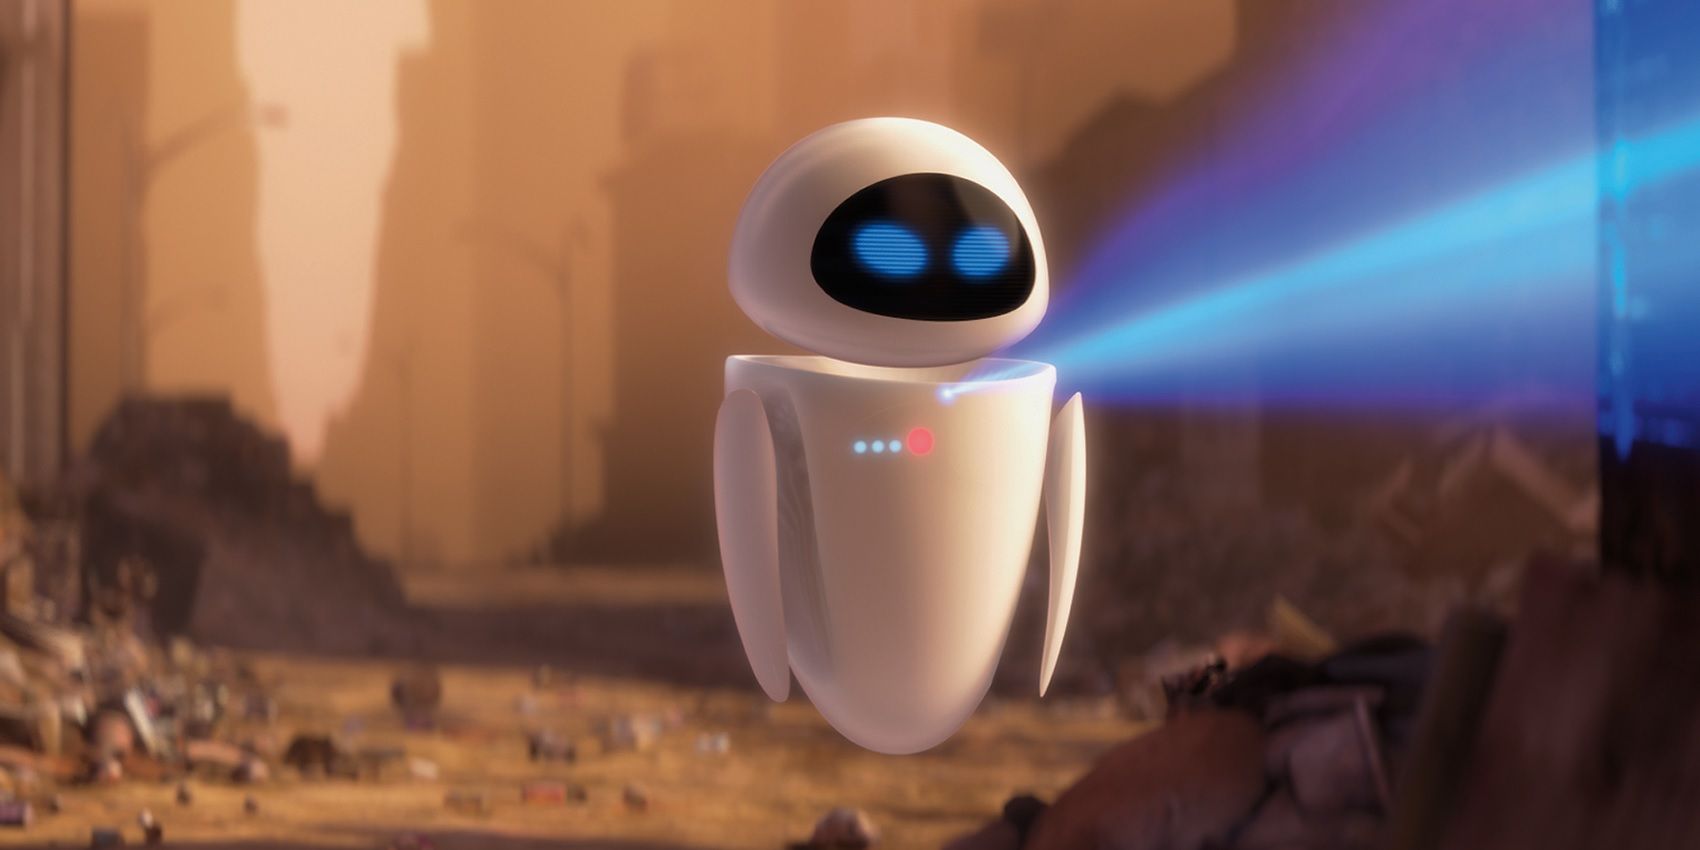 EVE scans her surroundings in WALL-E